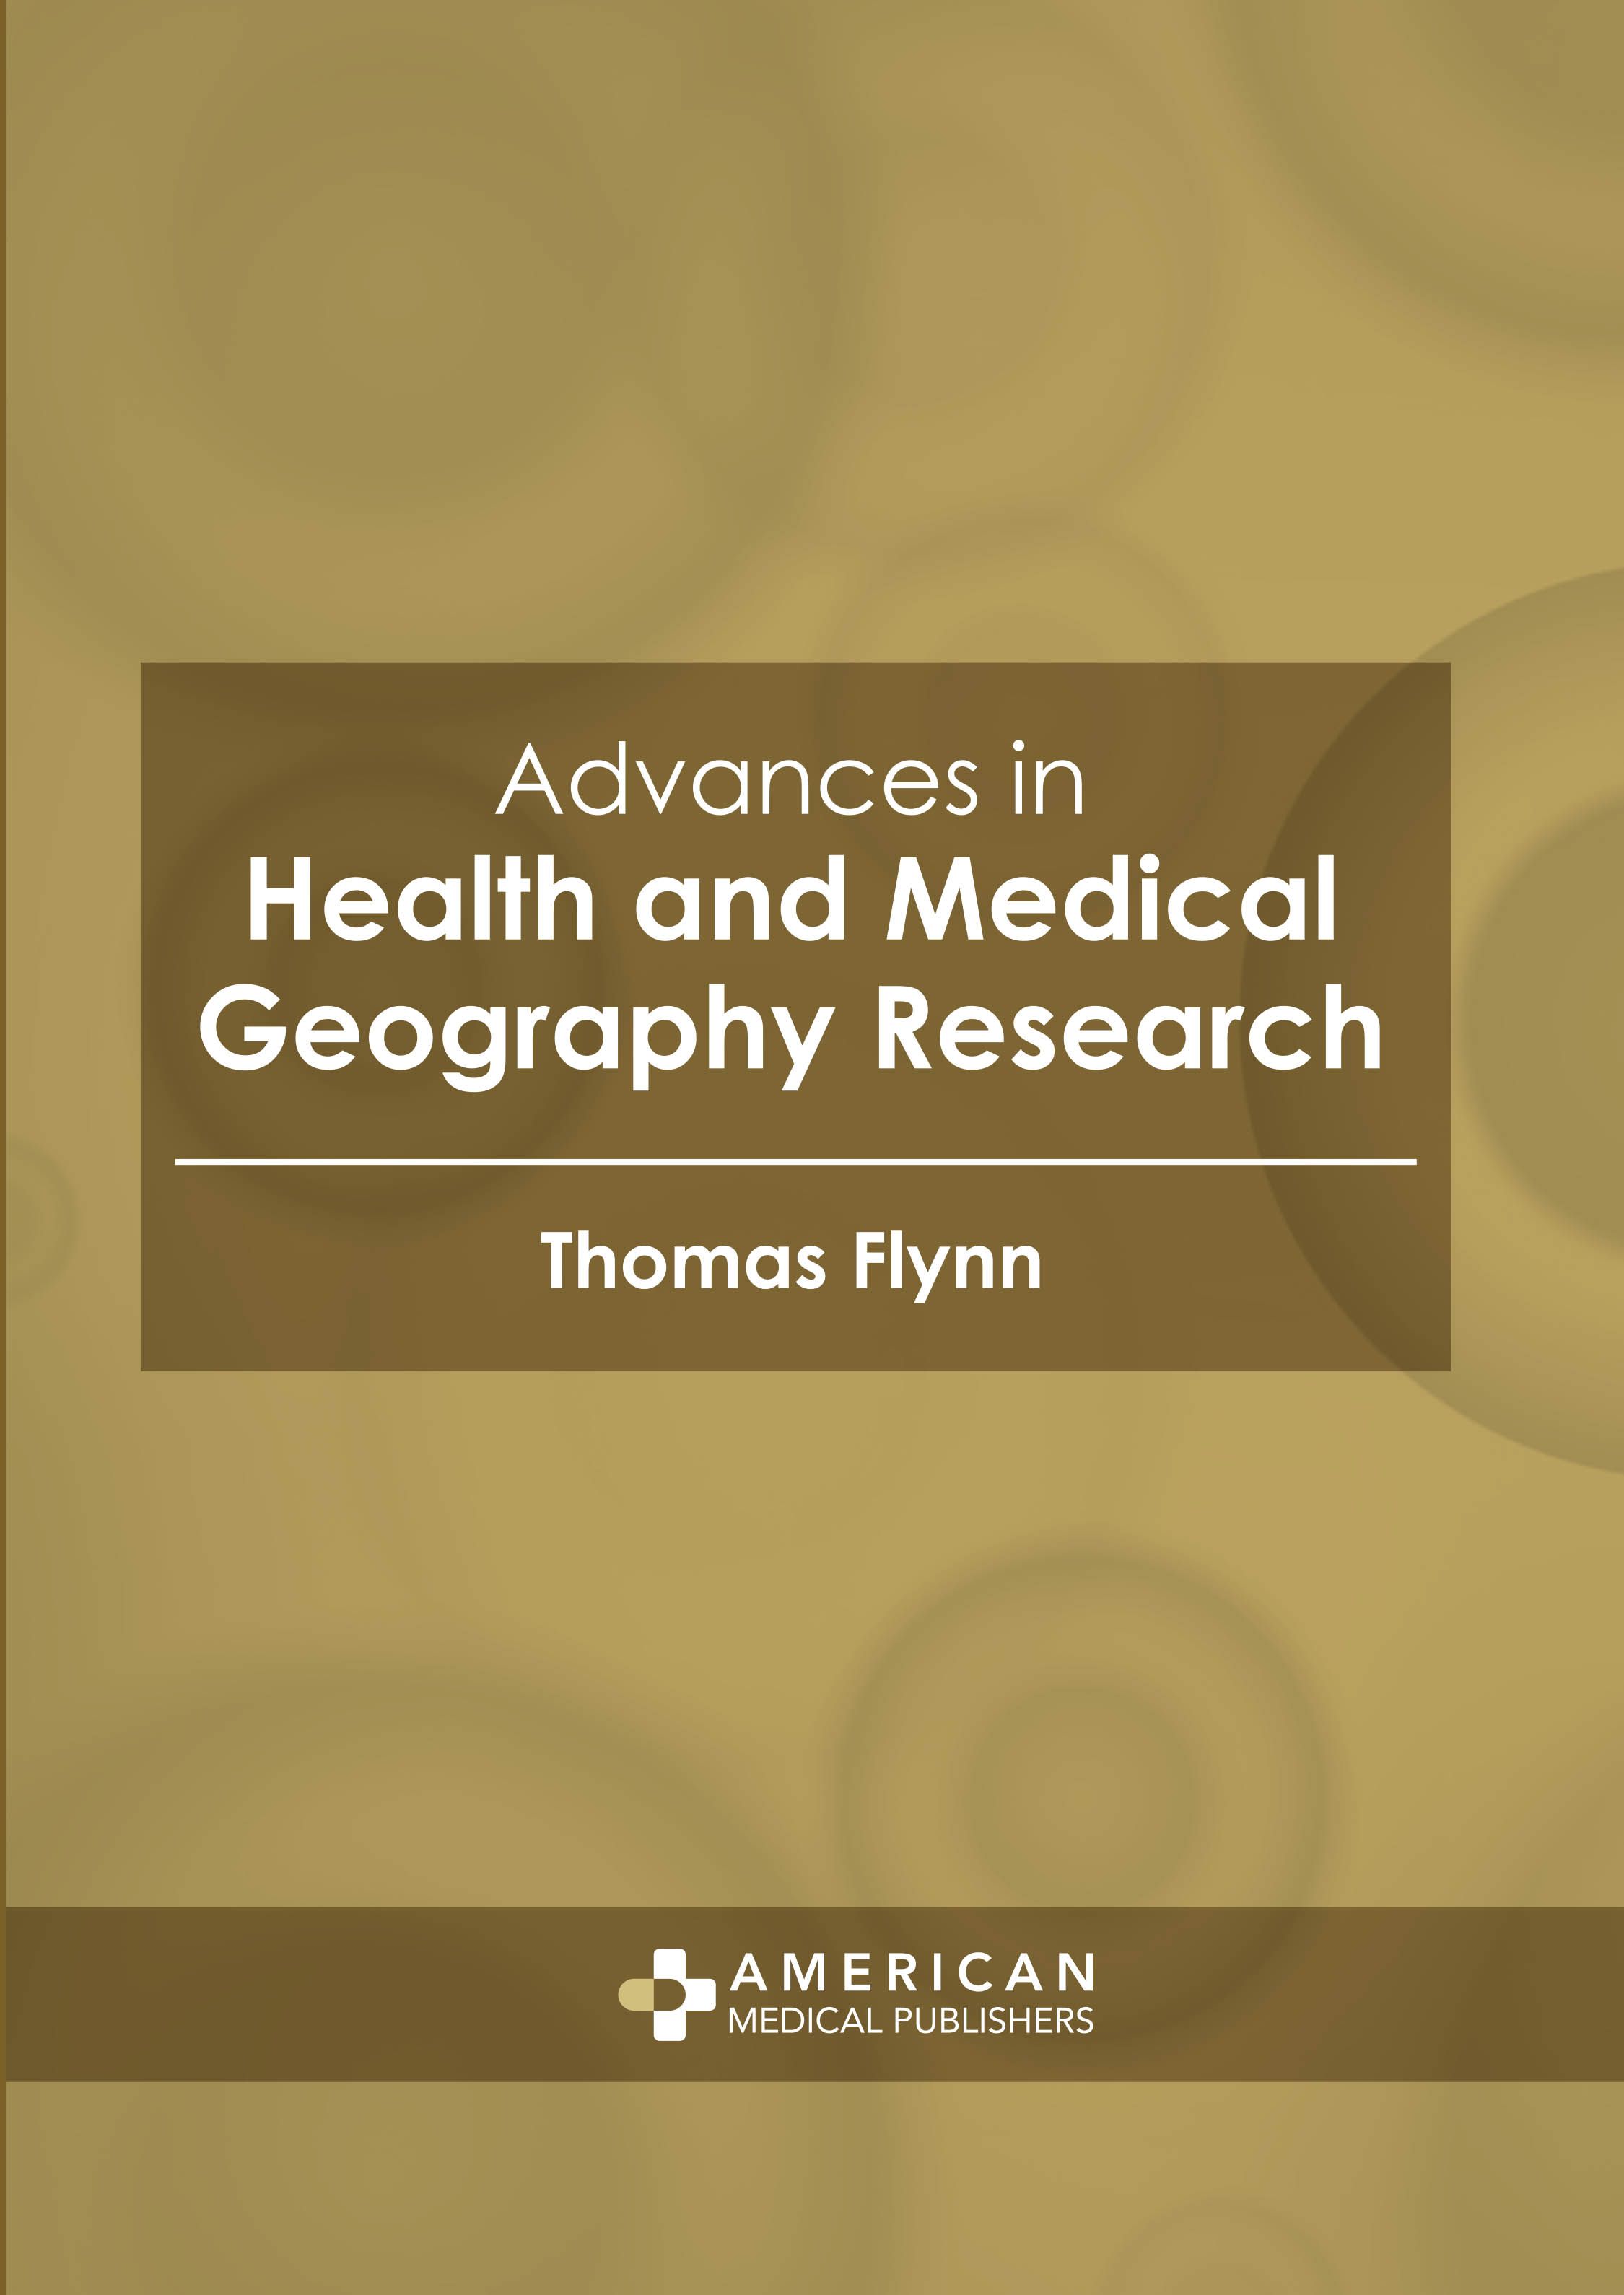 ADVANCES IN HEALTH AND MEDICAL GEOGRAPHY RESEARCH